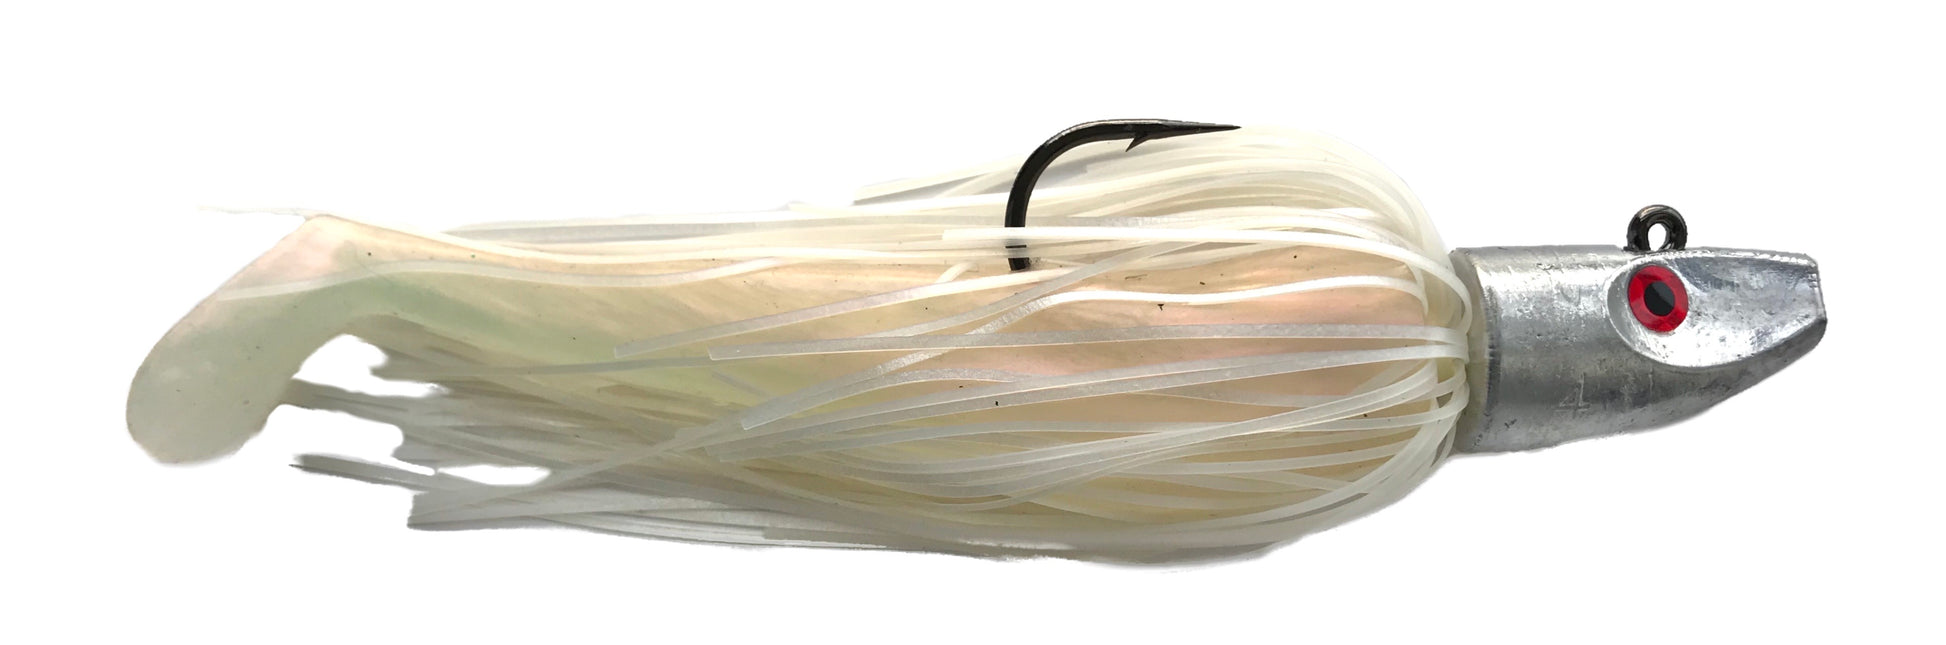 6 Skirted Whip-it fish : Rigged